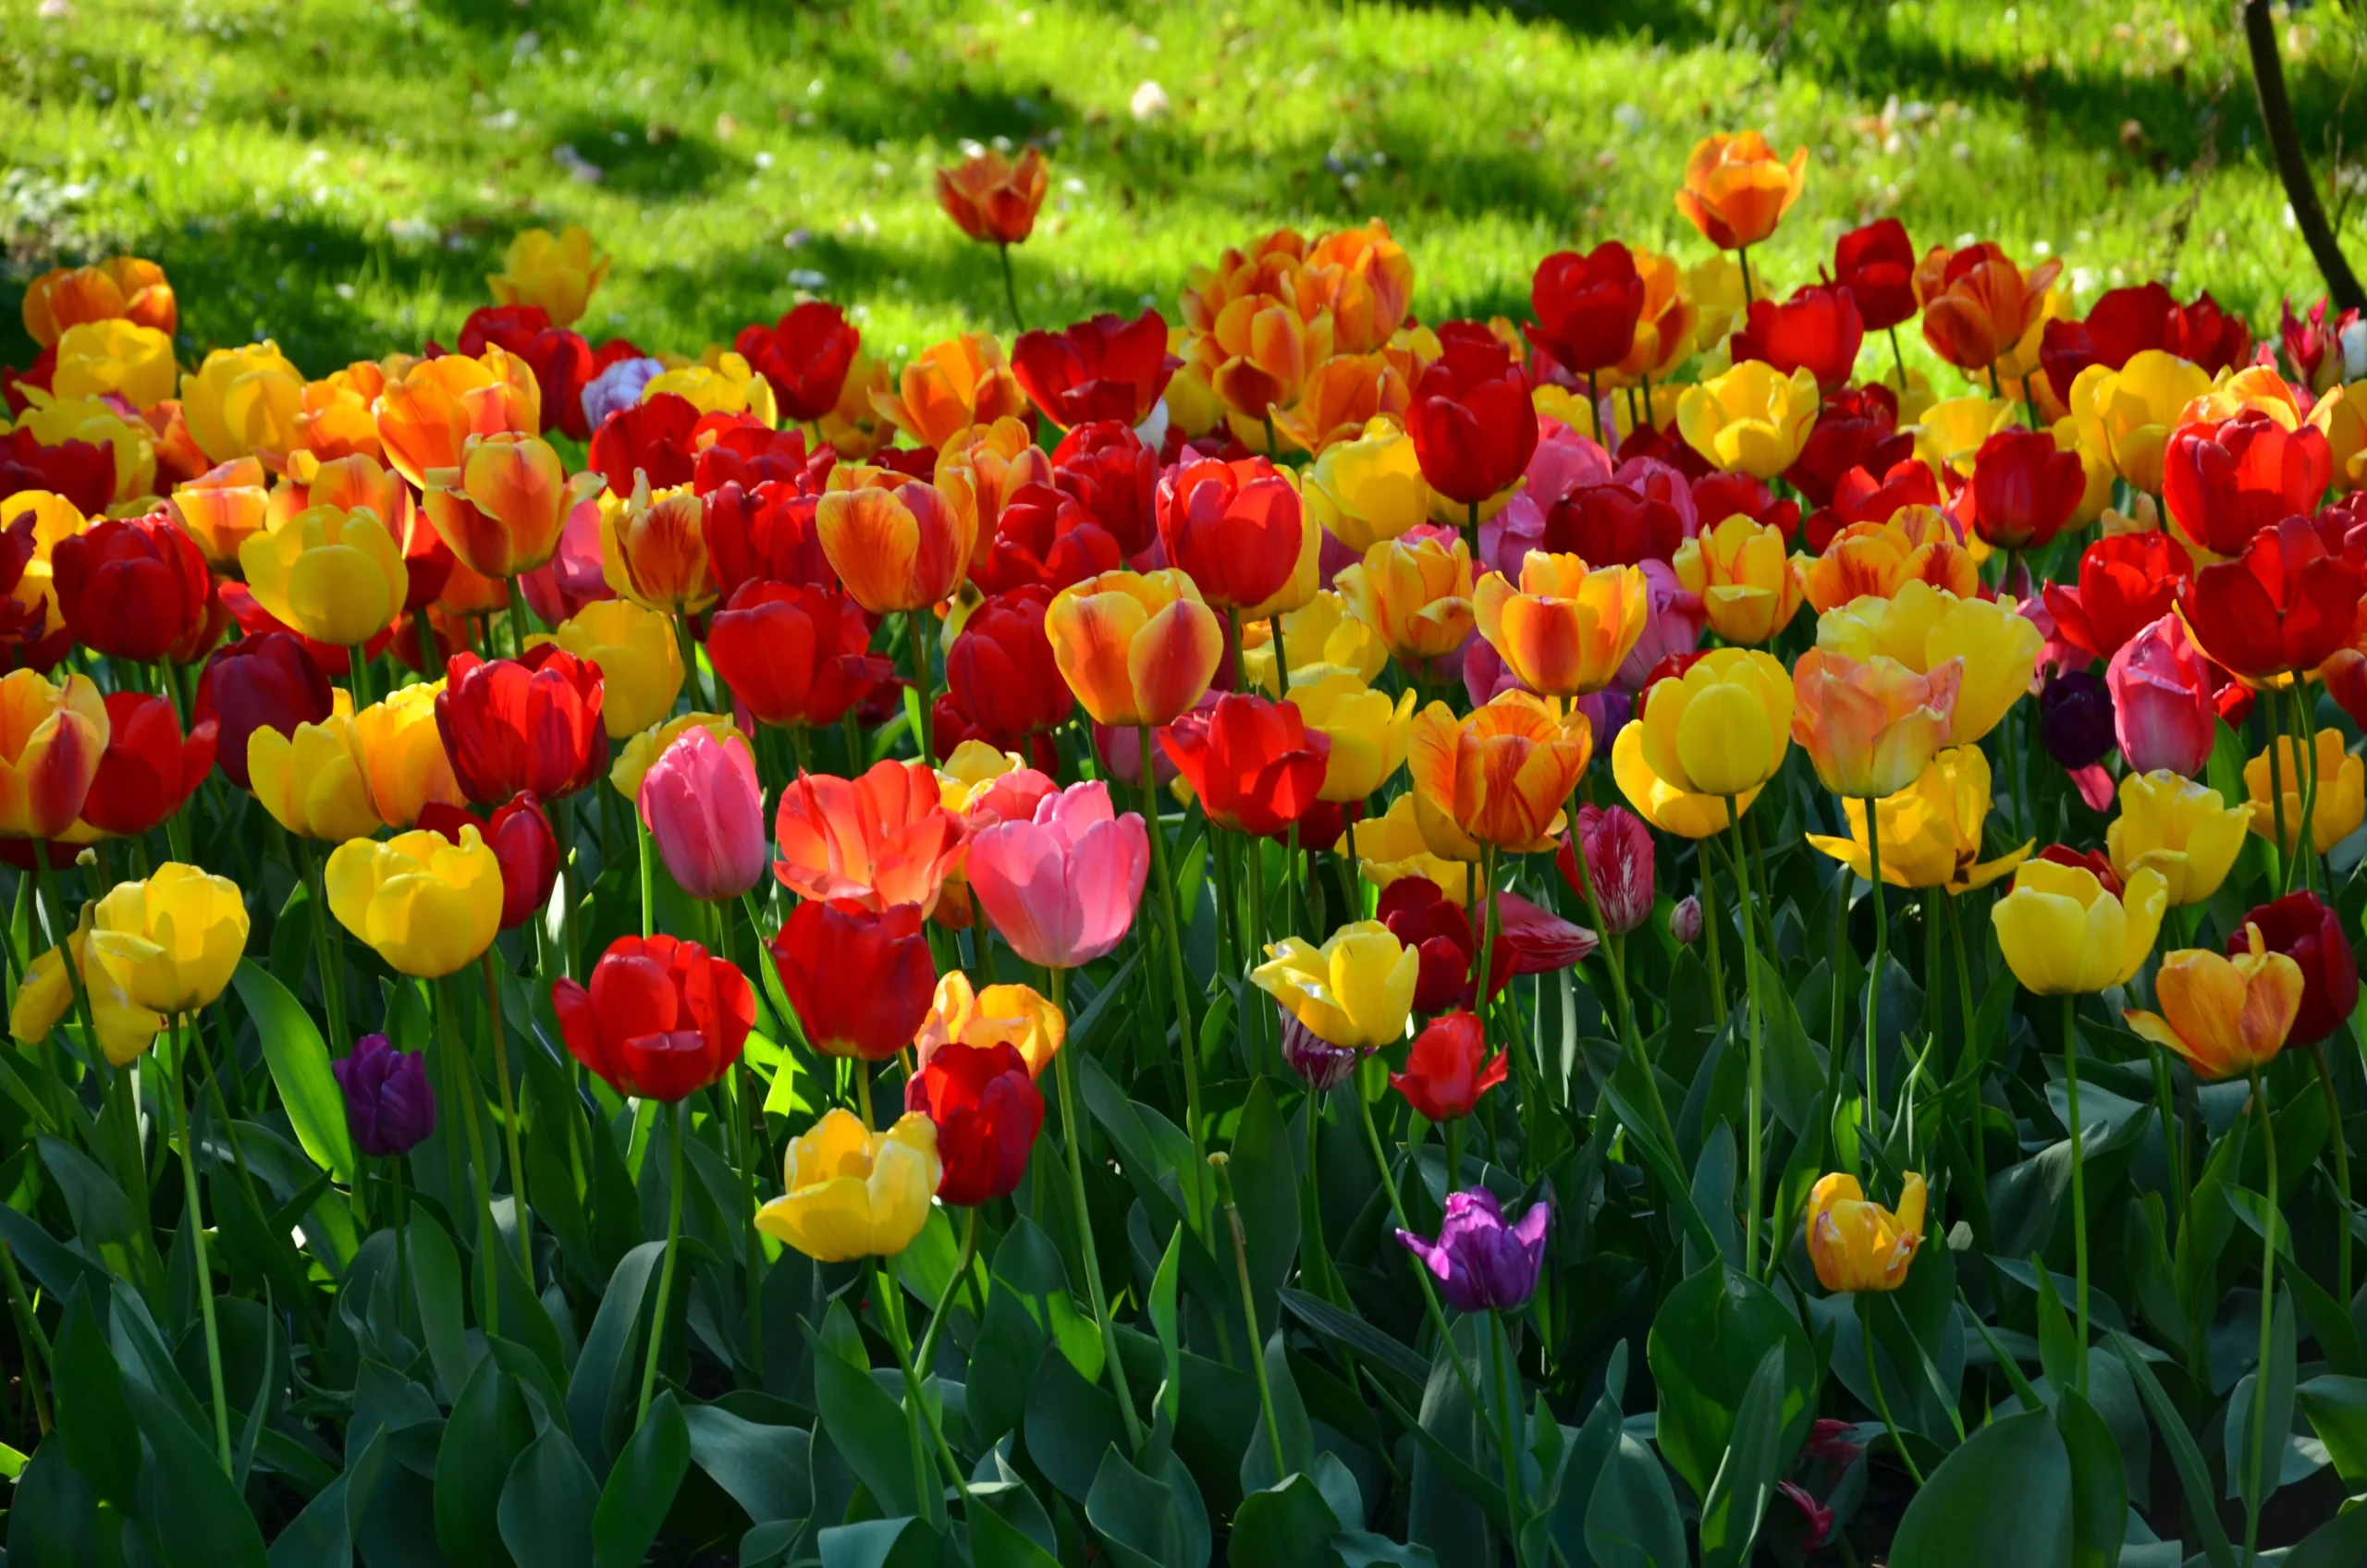 Do tulips bloom more than once?